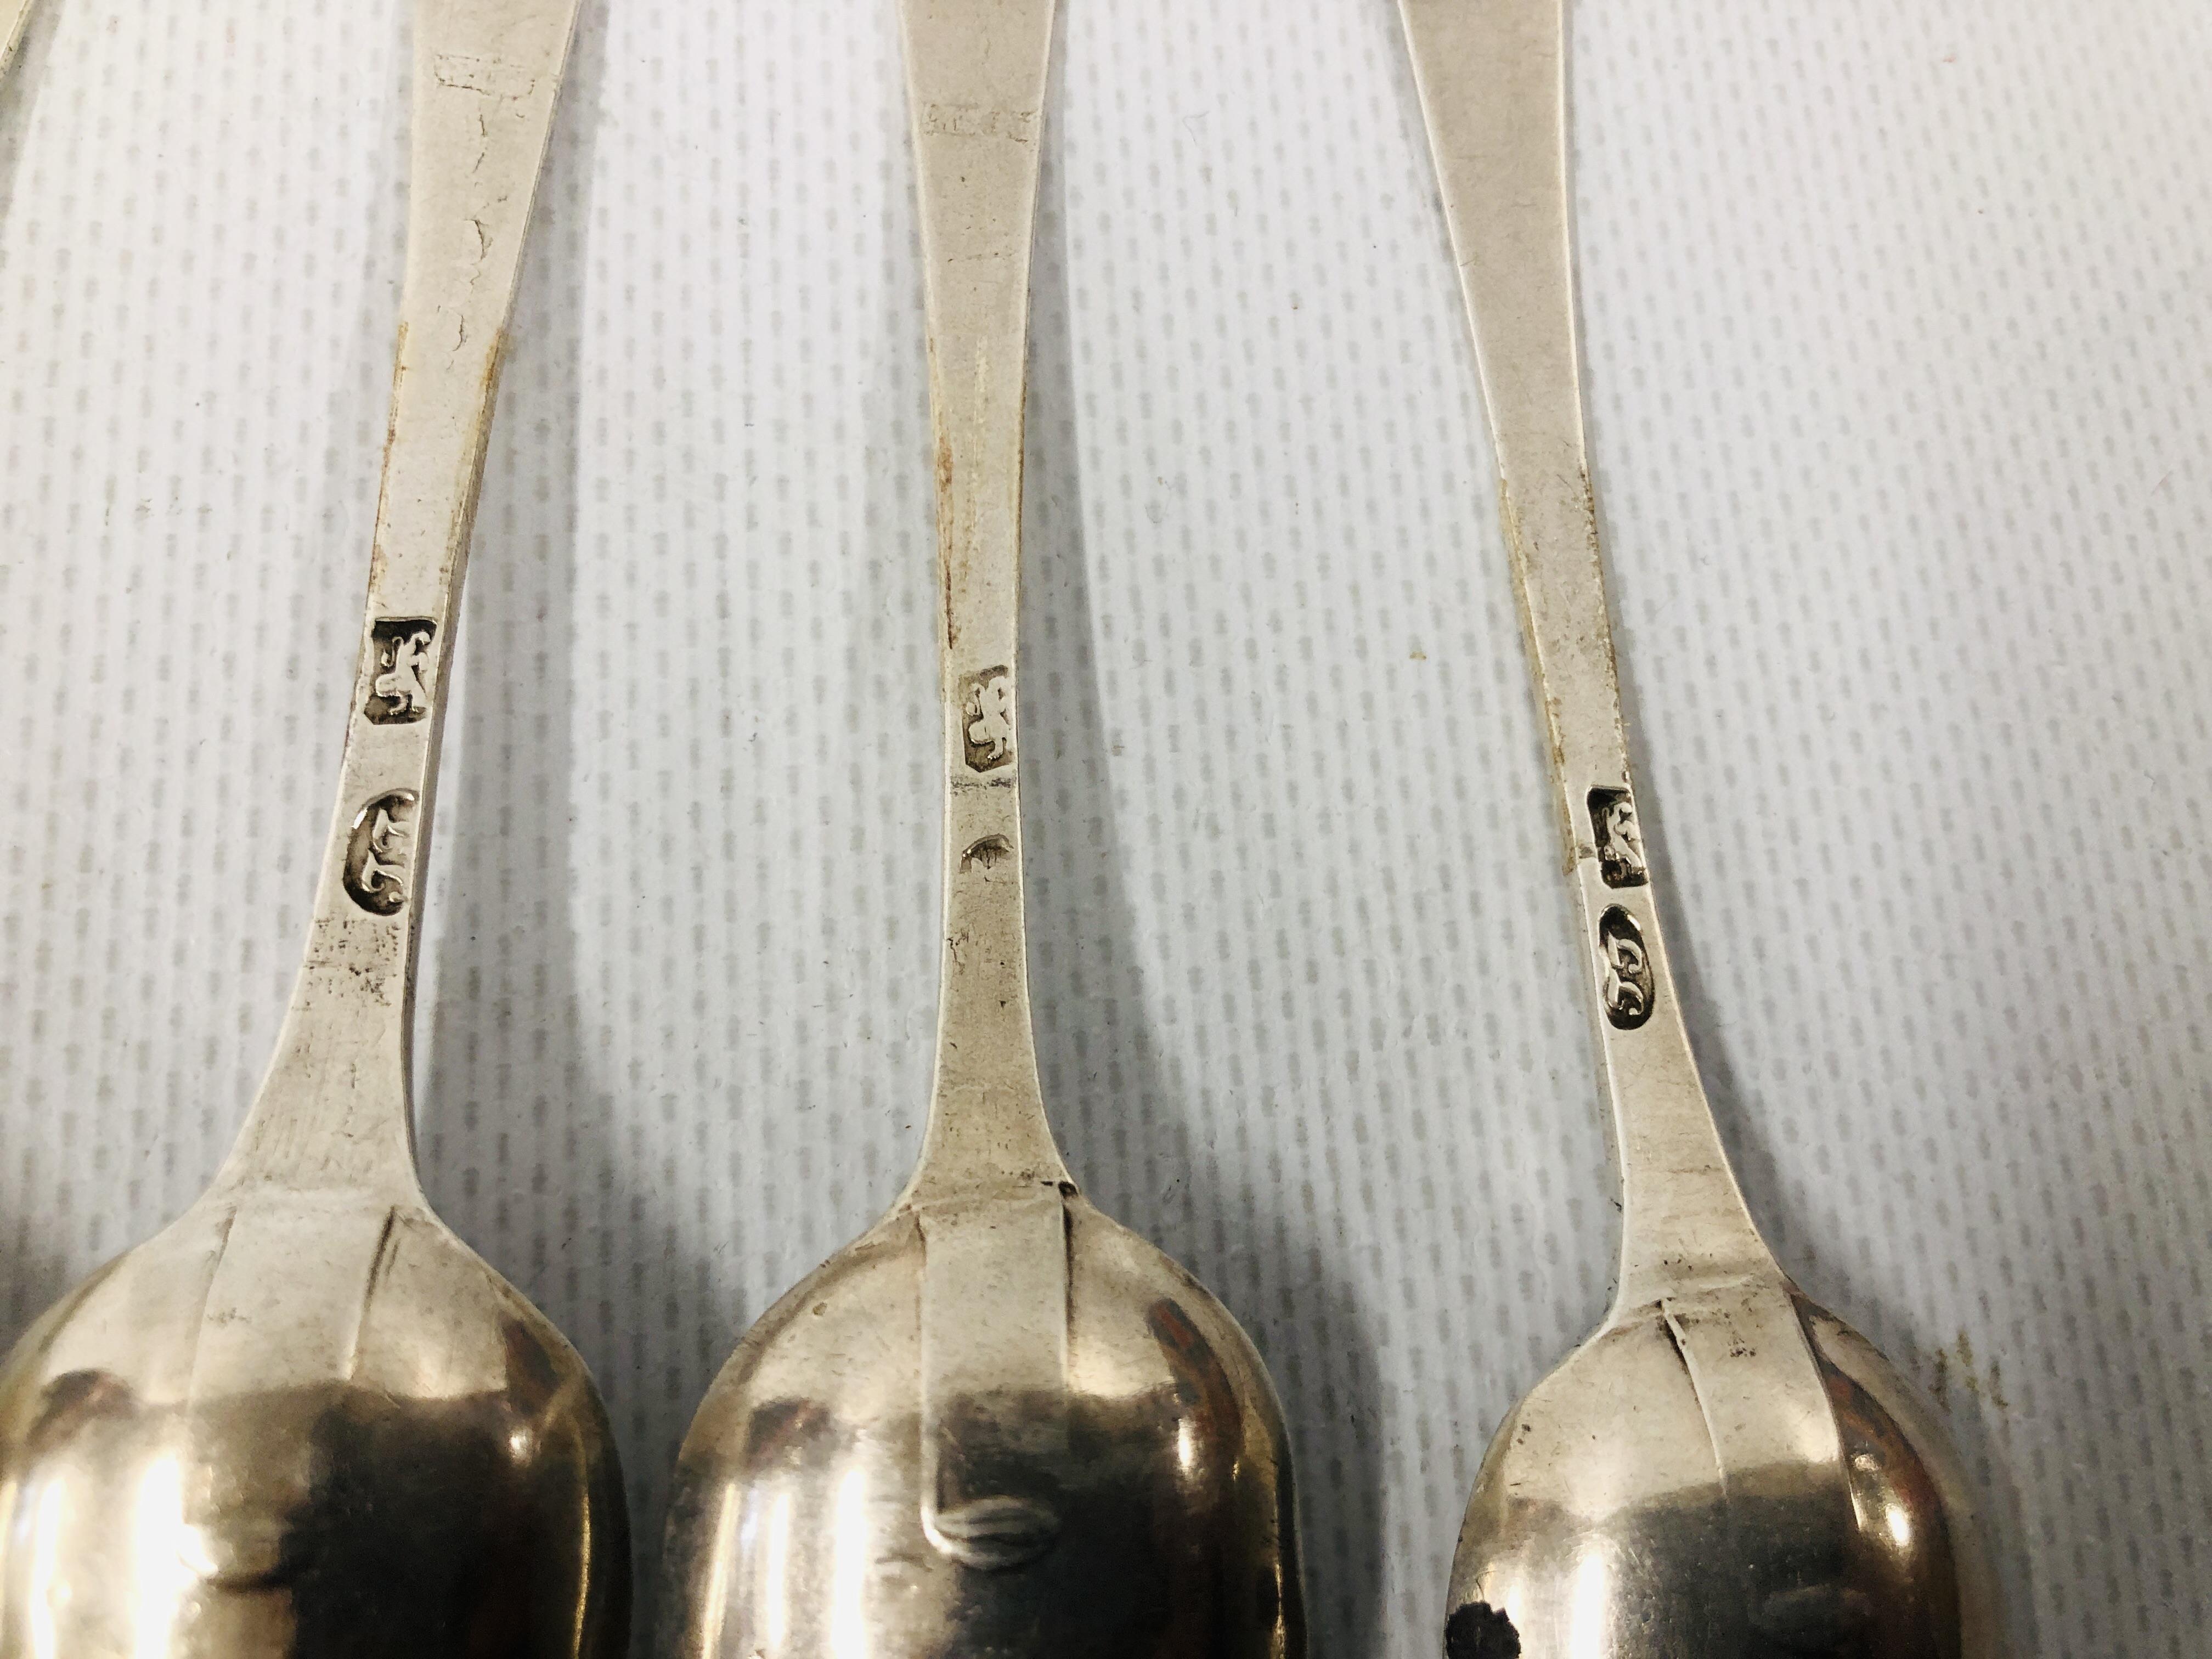 SET OF SIX SILVER GEORGE IV BRIGHT CUT TEA SPOONS, c1810. - Image 7 of 9